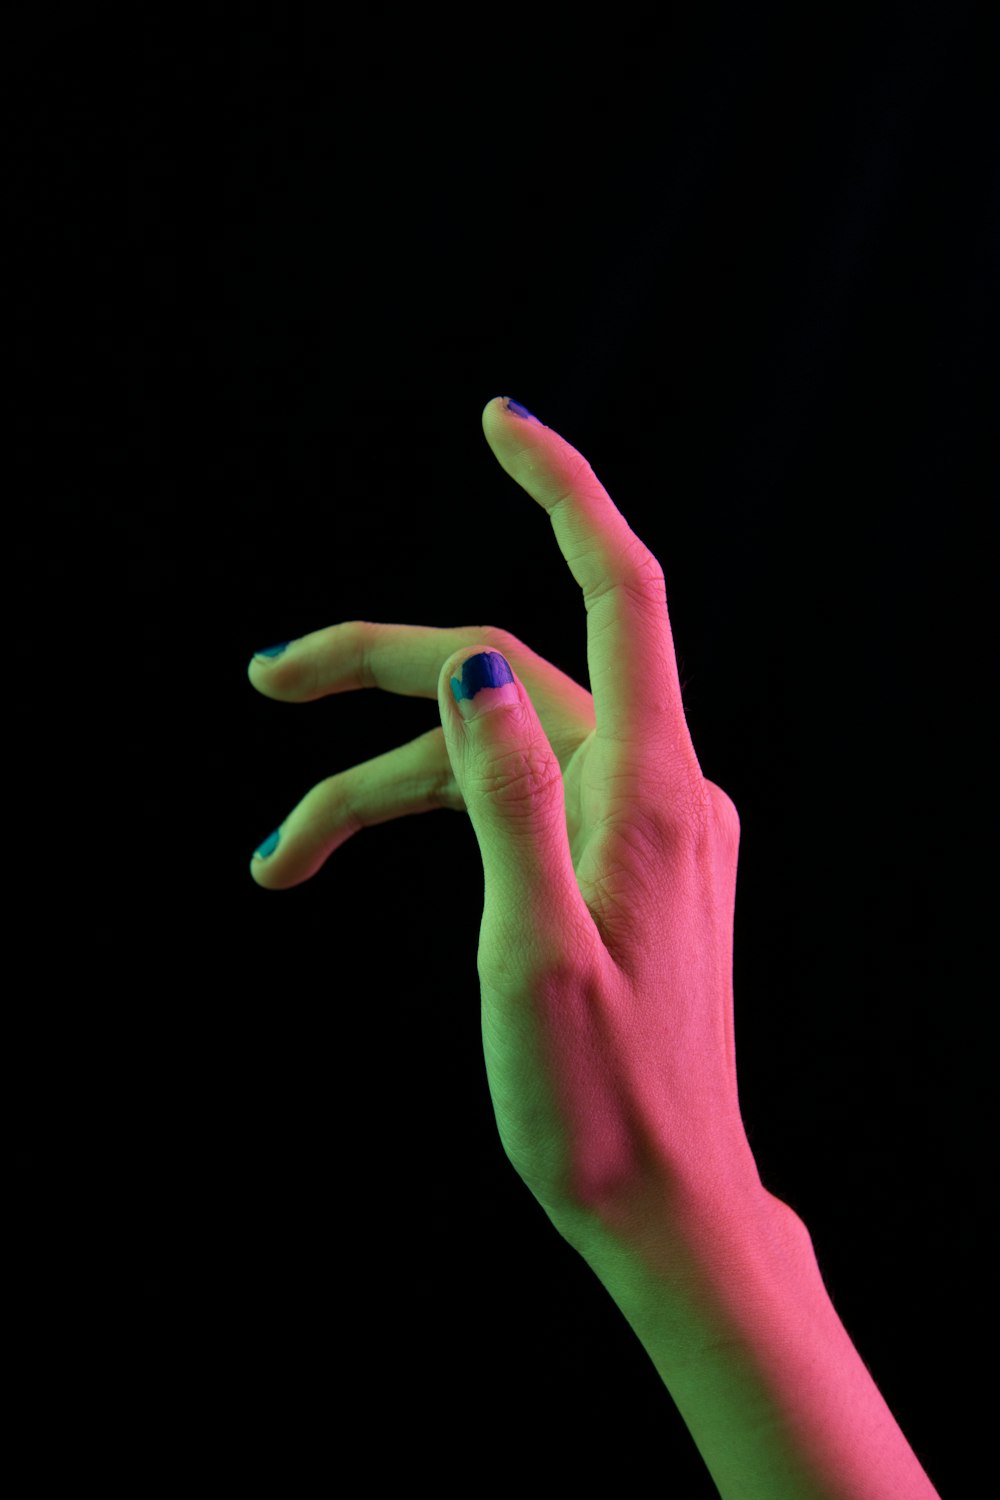 a person's hand with blue and green nail polish